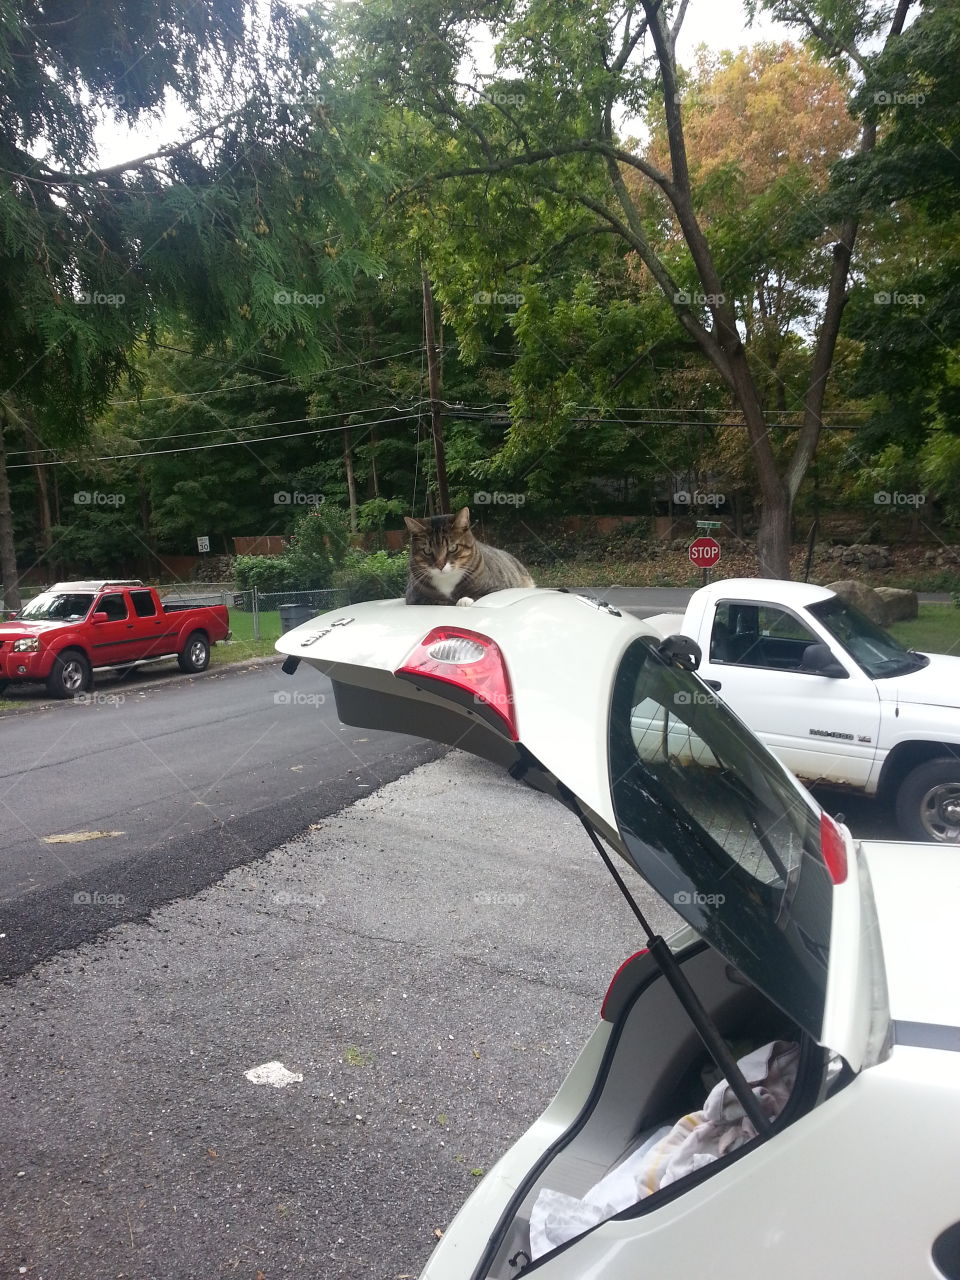 Cat resting on the car